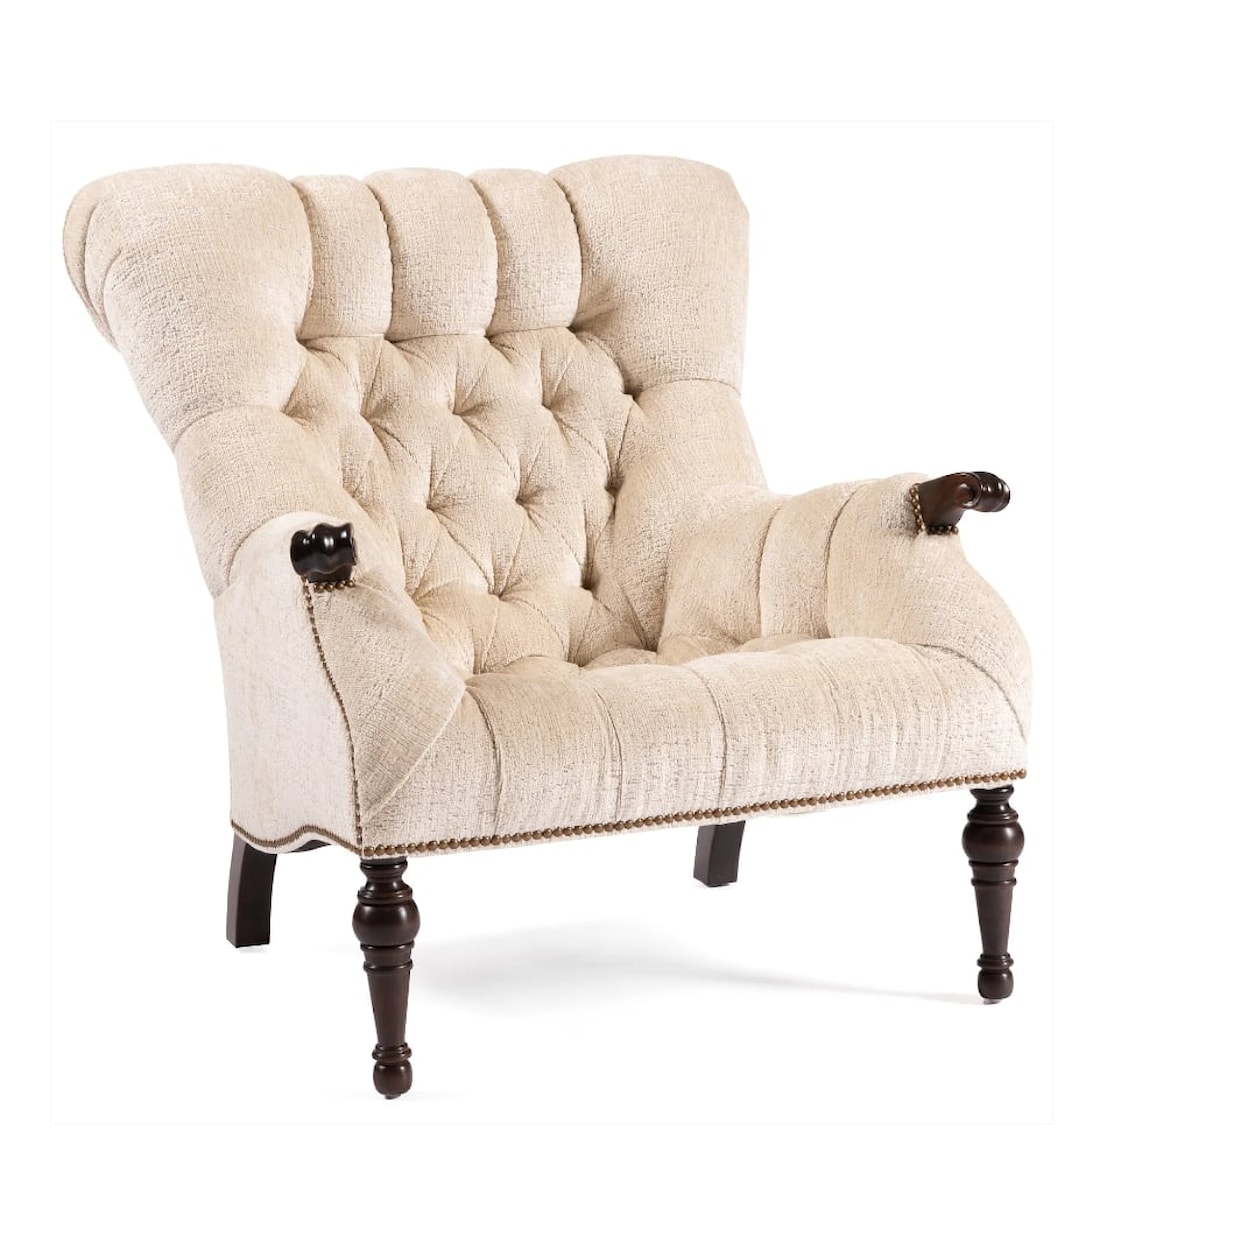 Stickley Leopold's Collection Chair